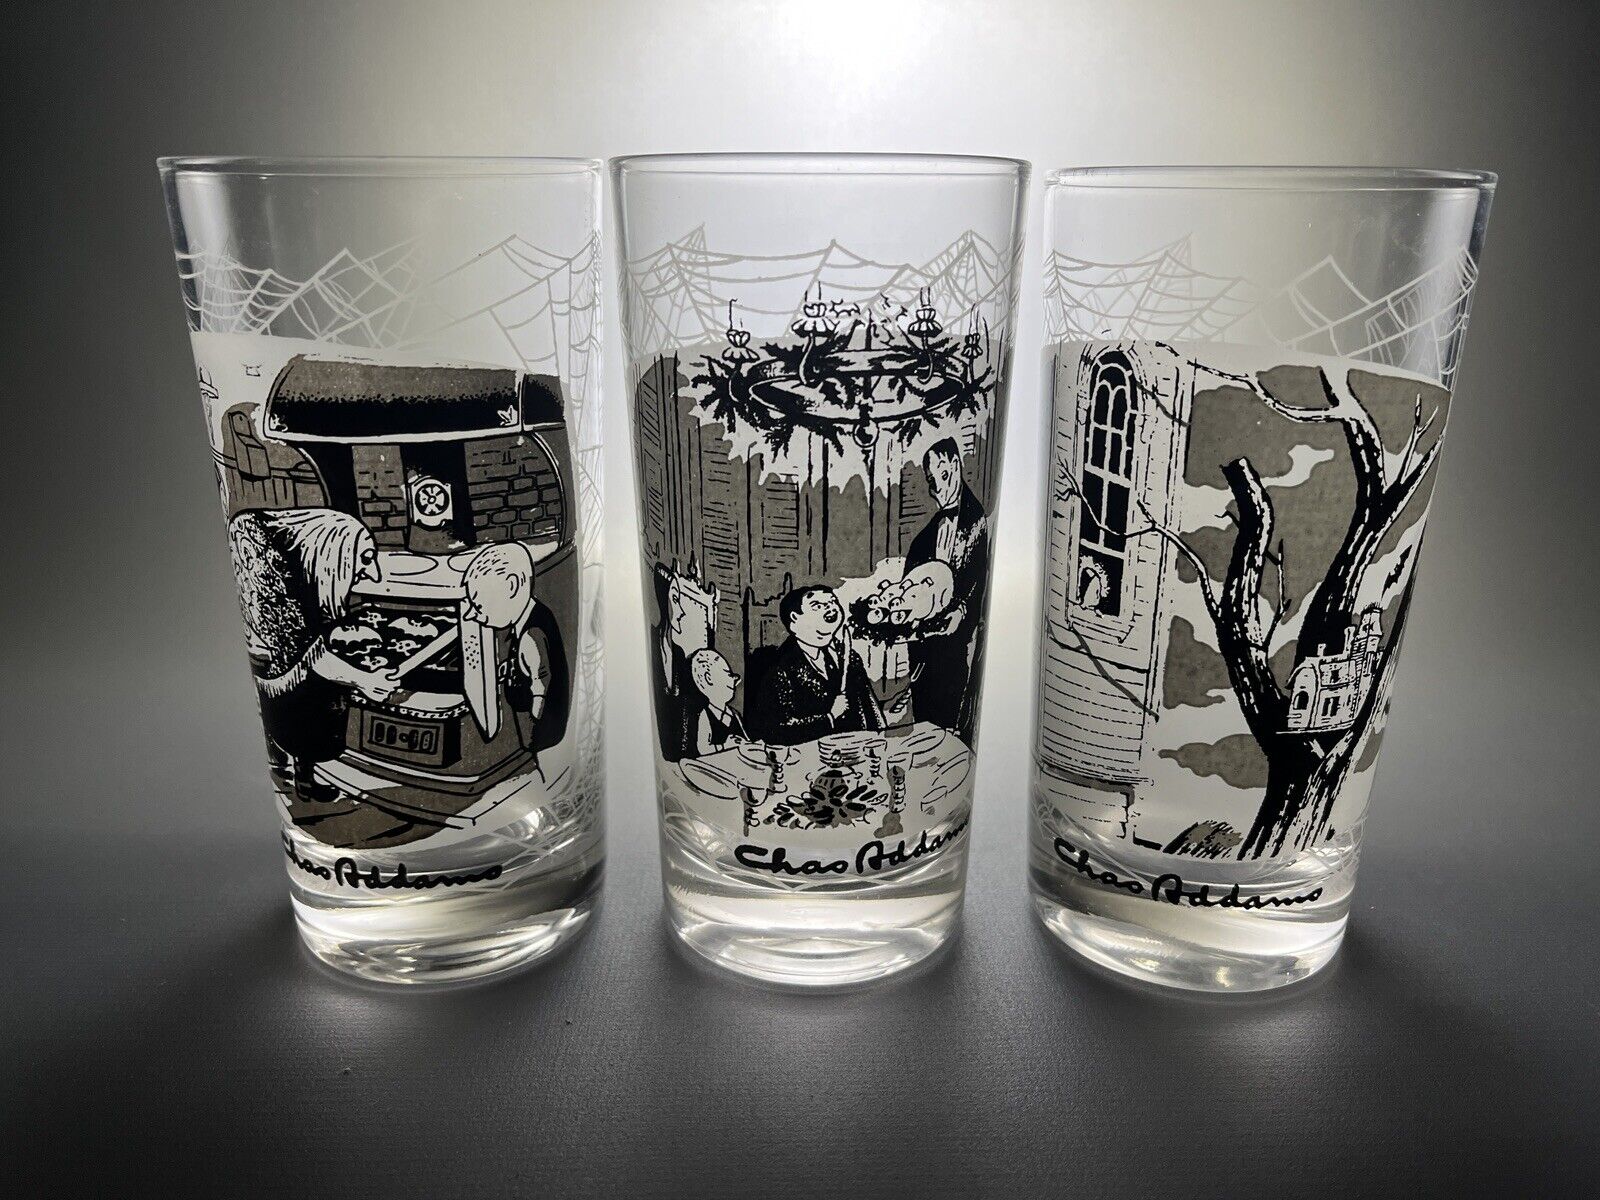 Charles Addams Family Glass Tumblers - Set of 3 - Excellent Condition 